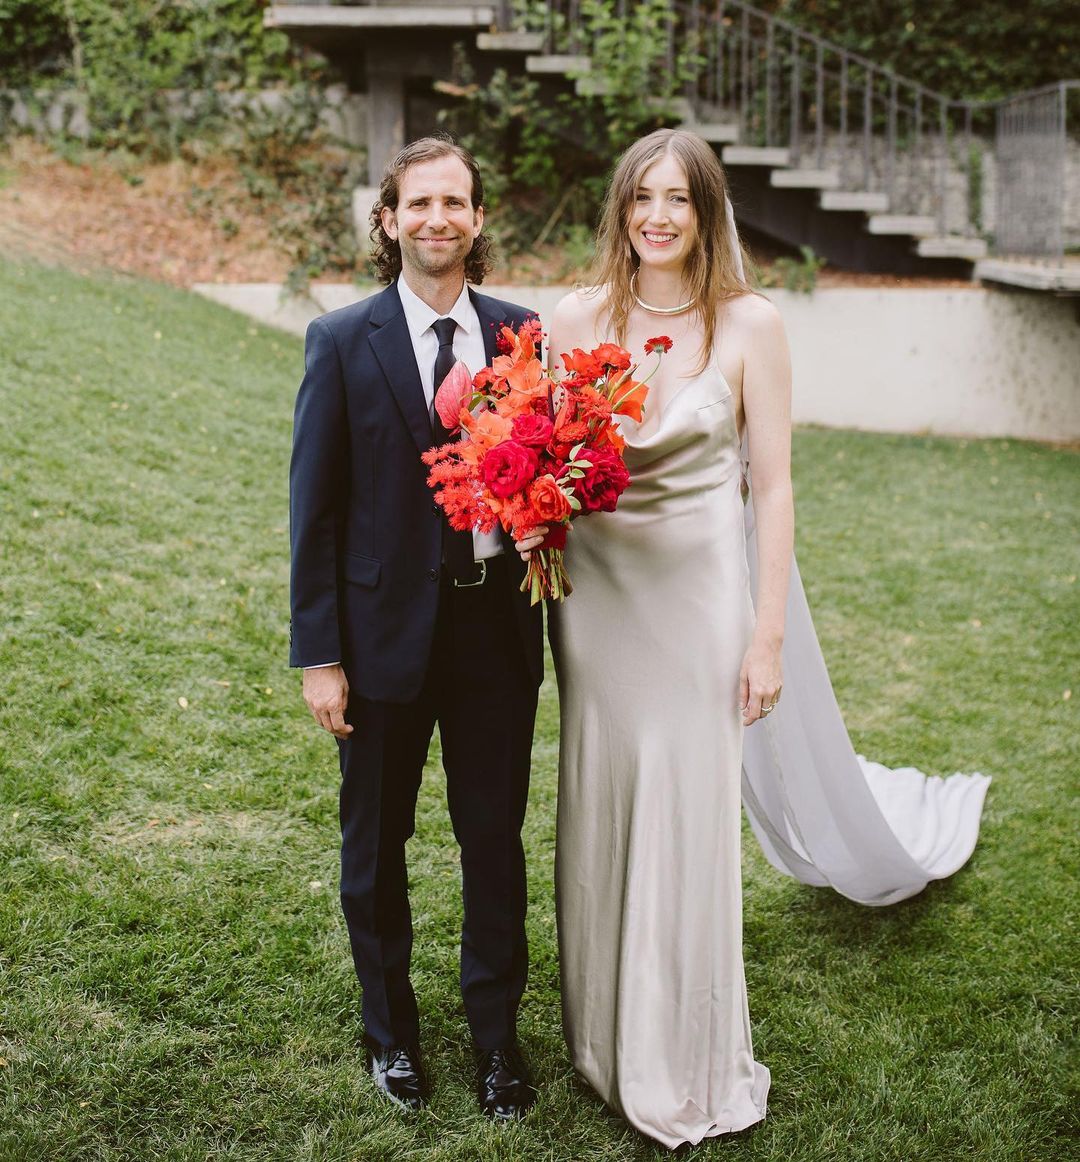 Kyle Mooney got married with his wife Kate Lyn Sheil in 2021.